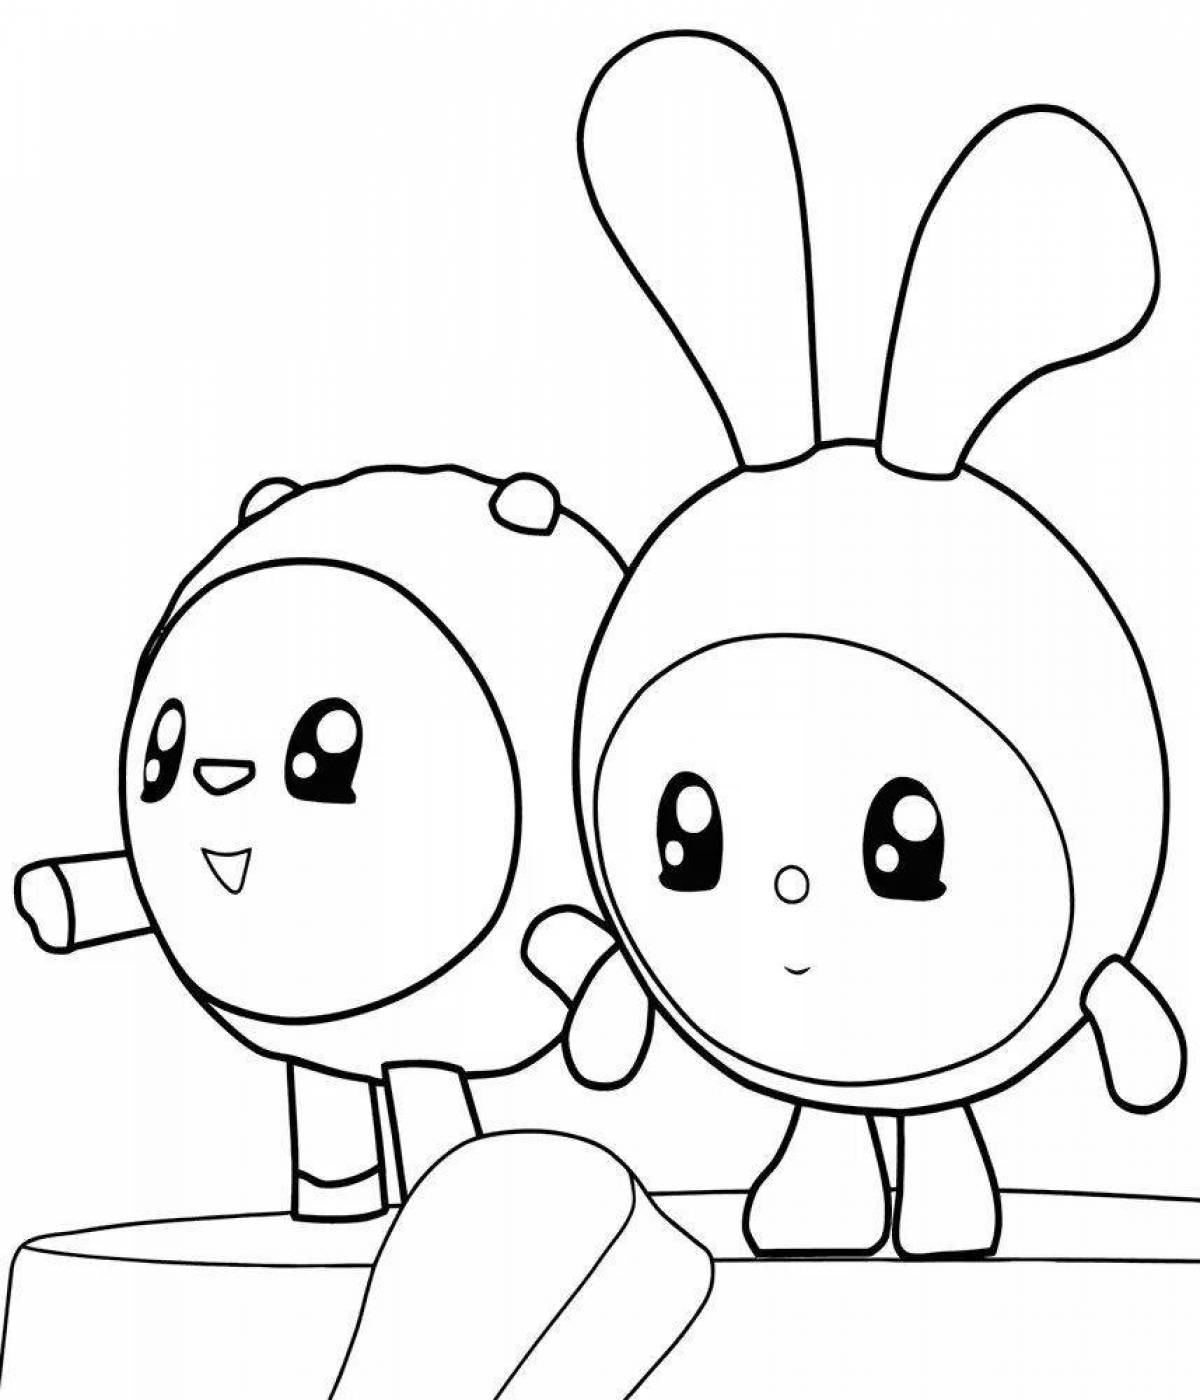 Coloring page for kids